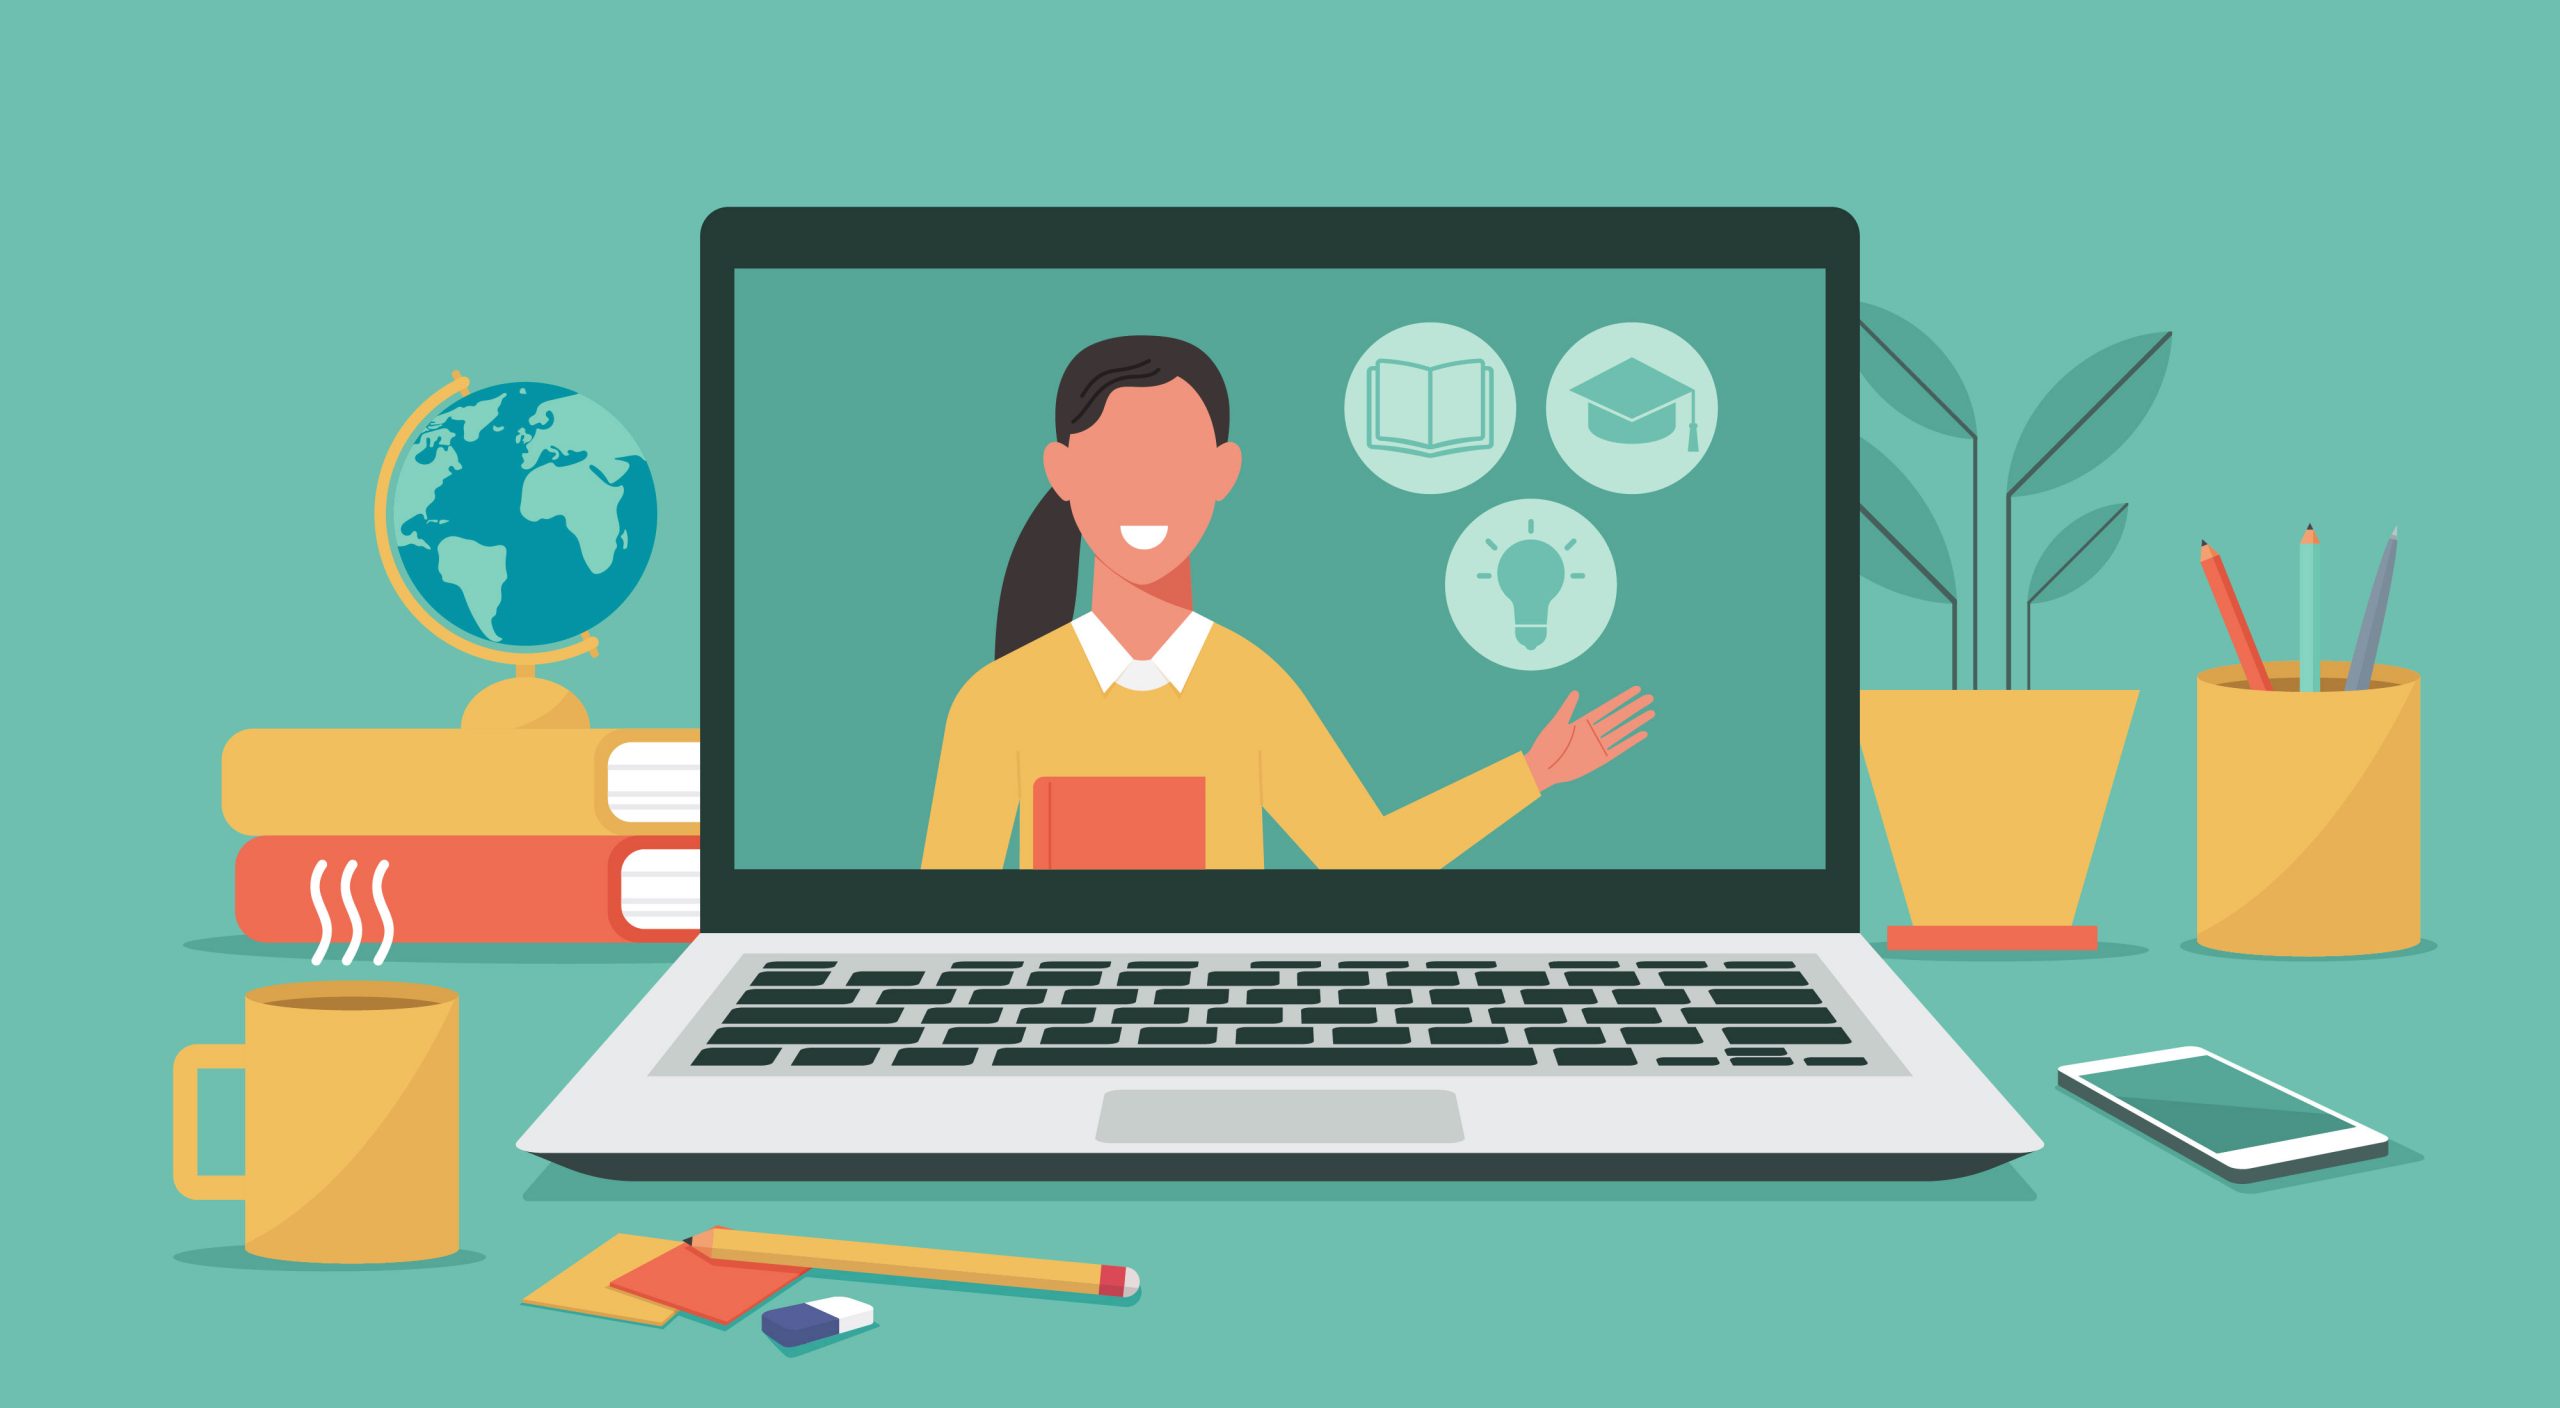 illustration of open laptop displaying a person presenting, the laptop is surrounded by common office item like books, hot beverage, pencils and a smartphone.